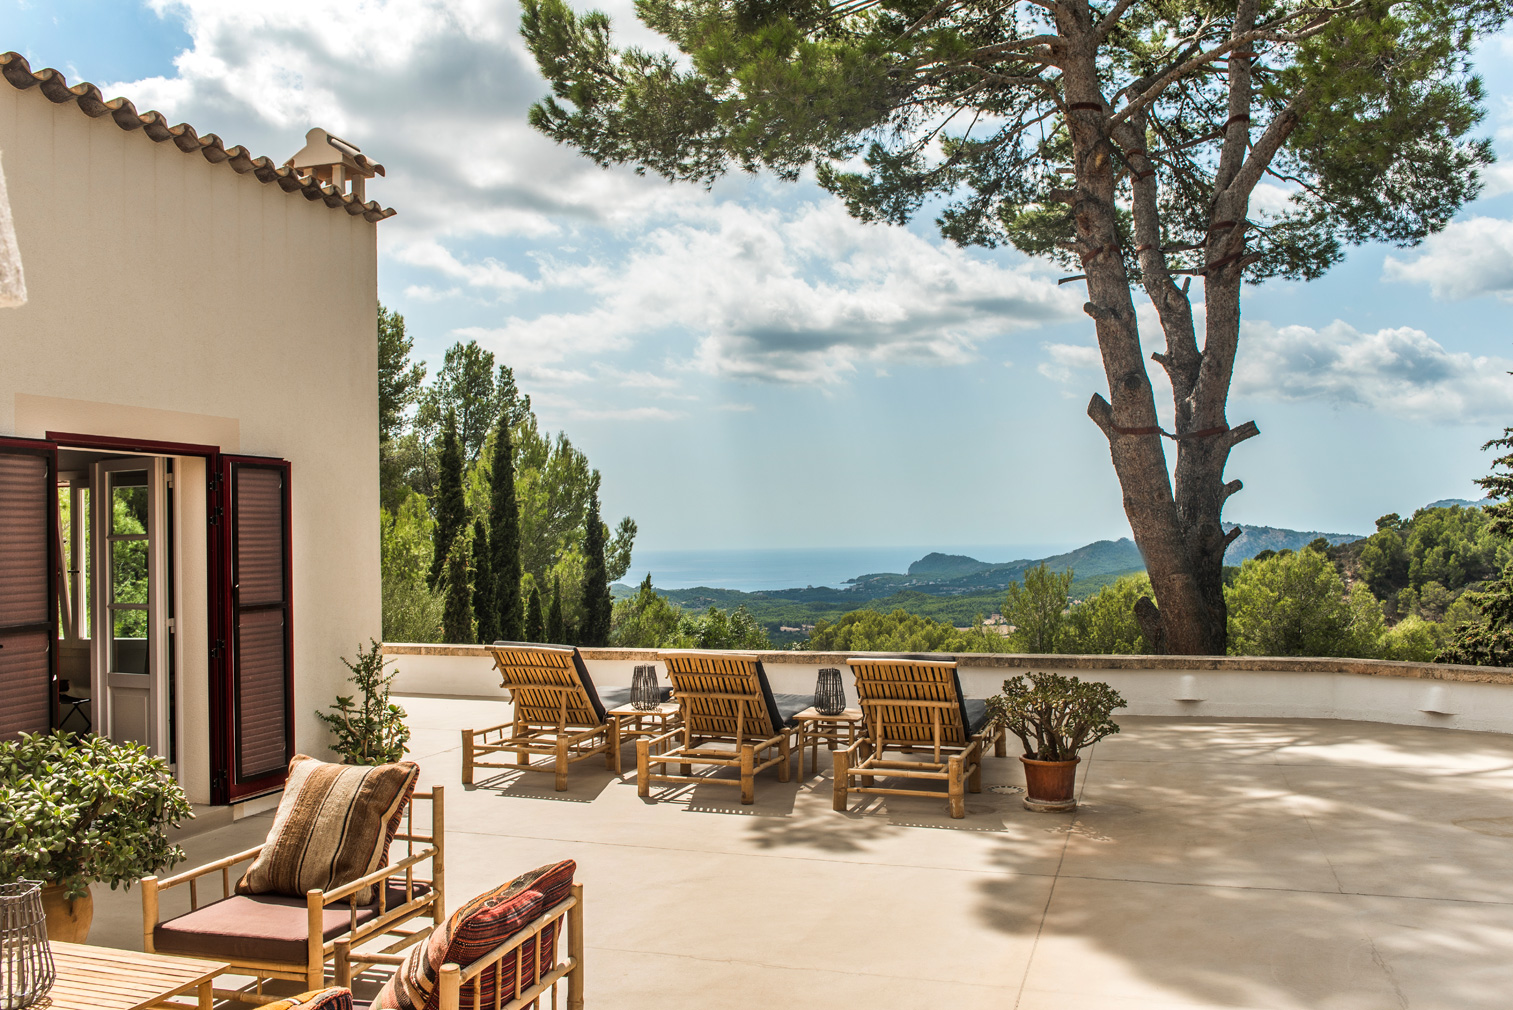 Modern Mallorcan holiday villa with Ibizan views lists for €2.95m